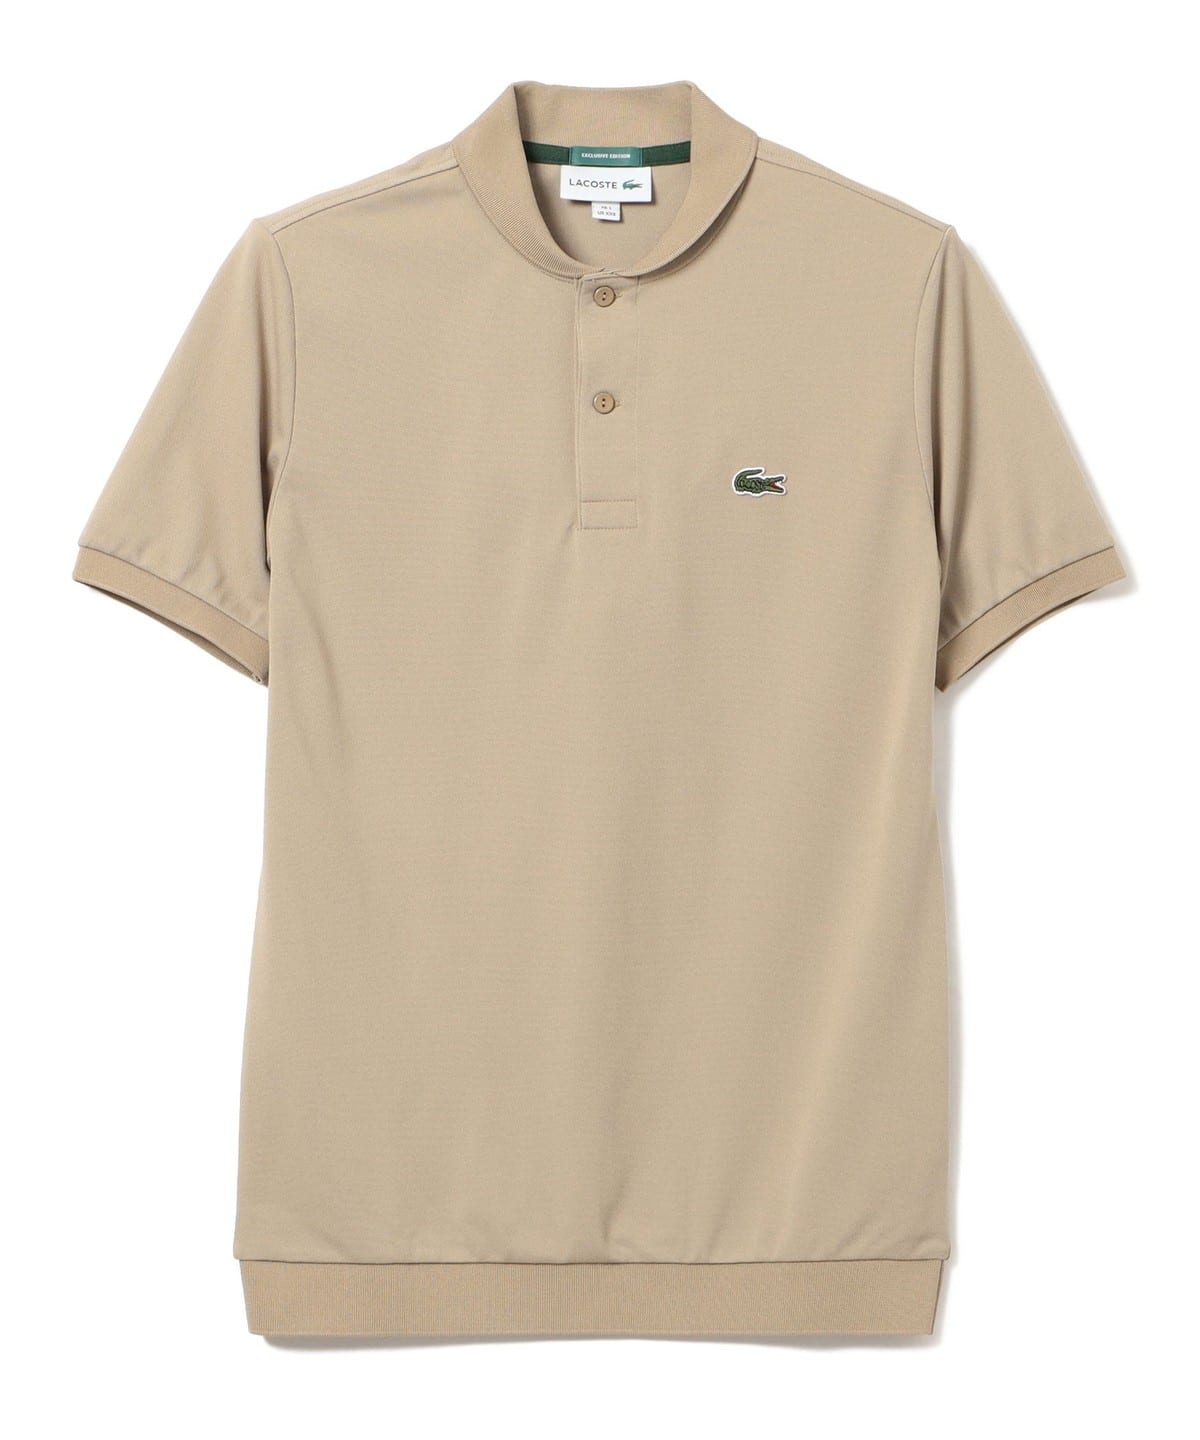 LACOSTE for BEAMS GOLF XSサイズ-